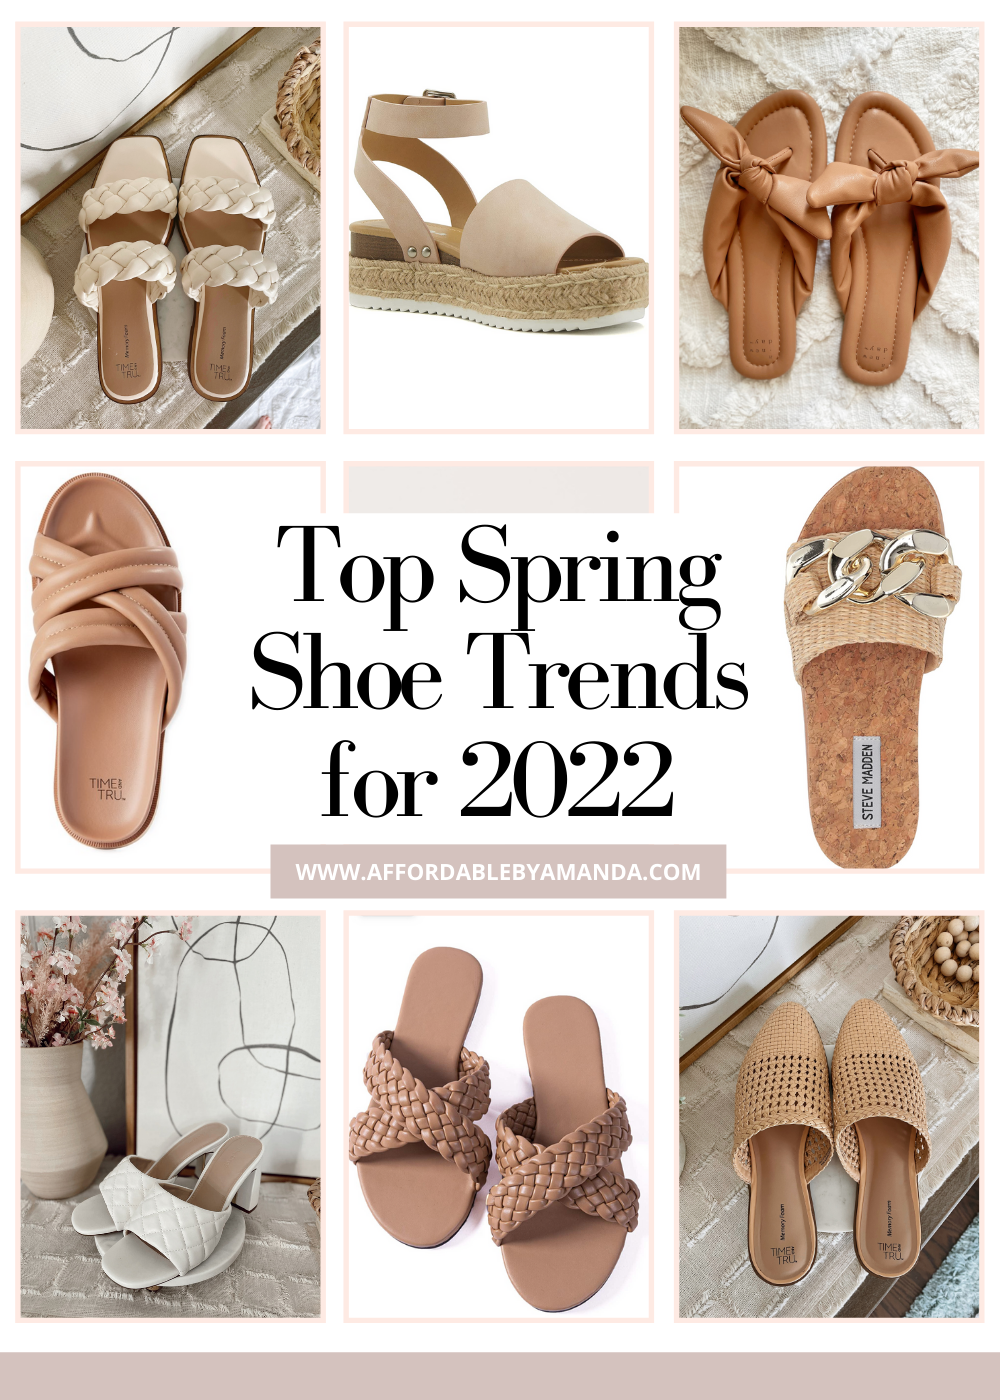 Shoes 2022 Trend